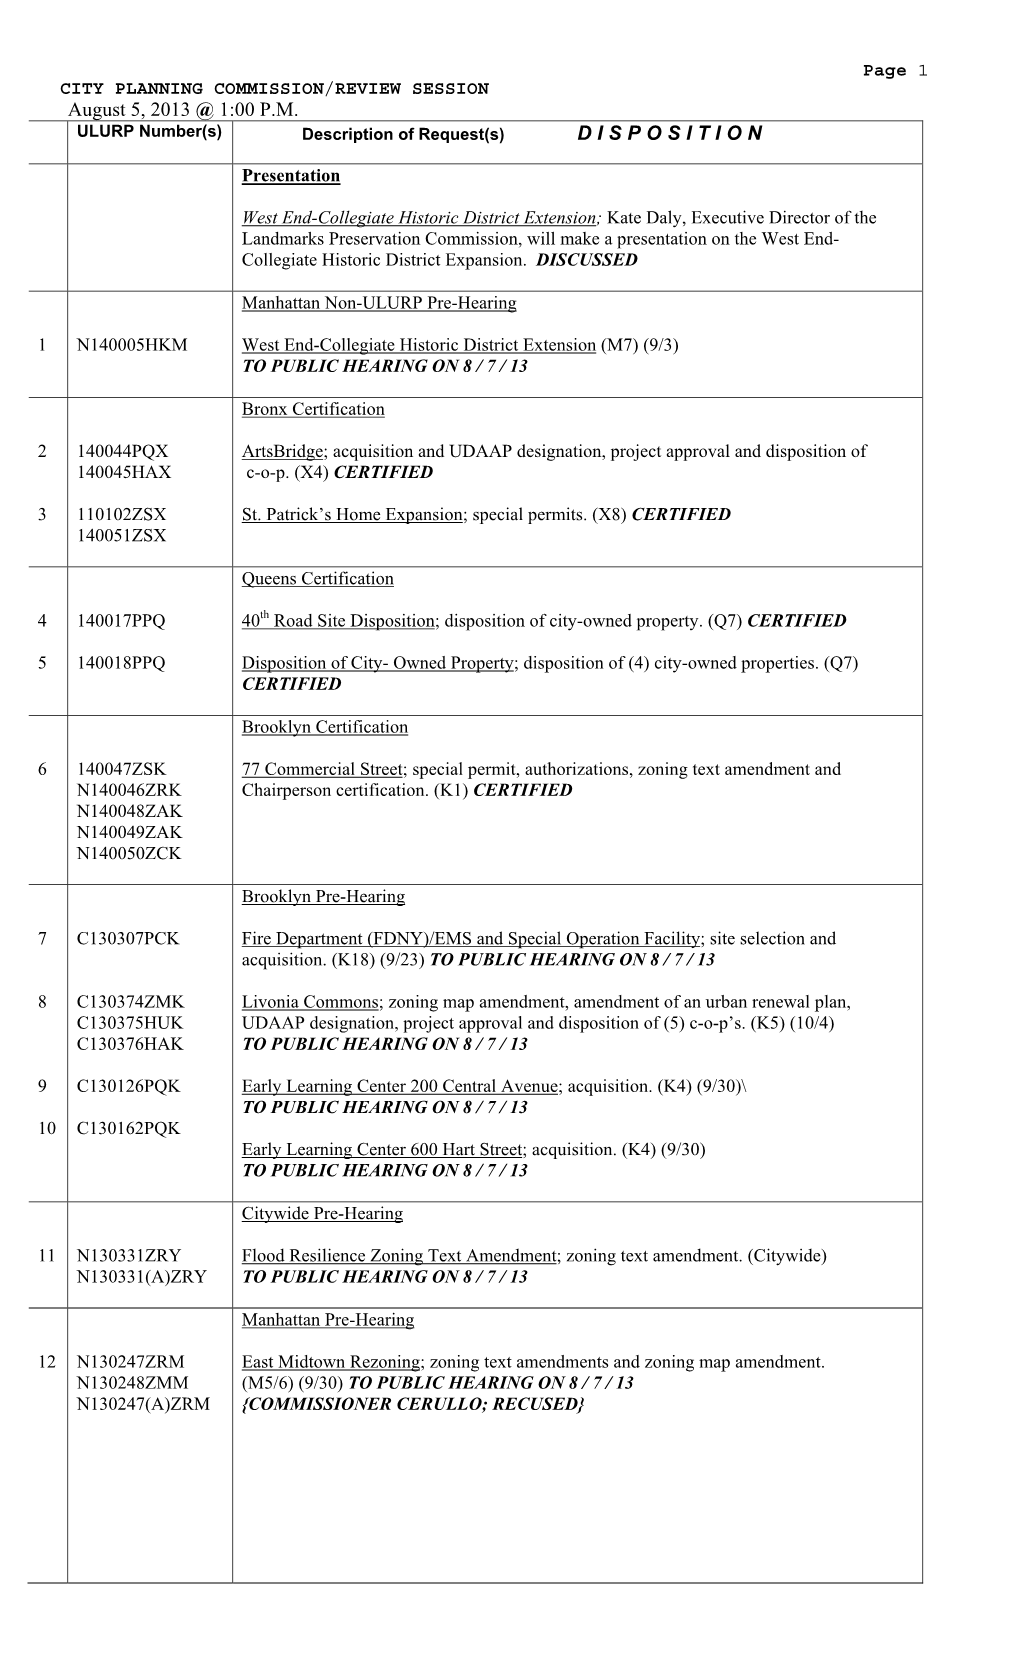 Review Session Disposition Sheet